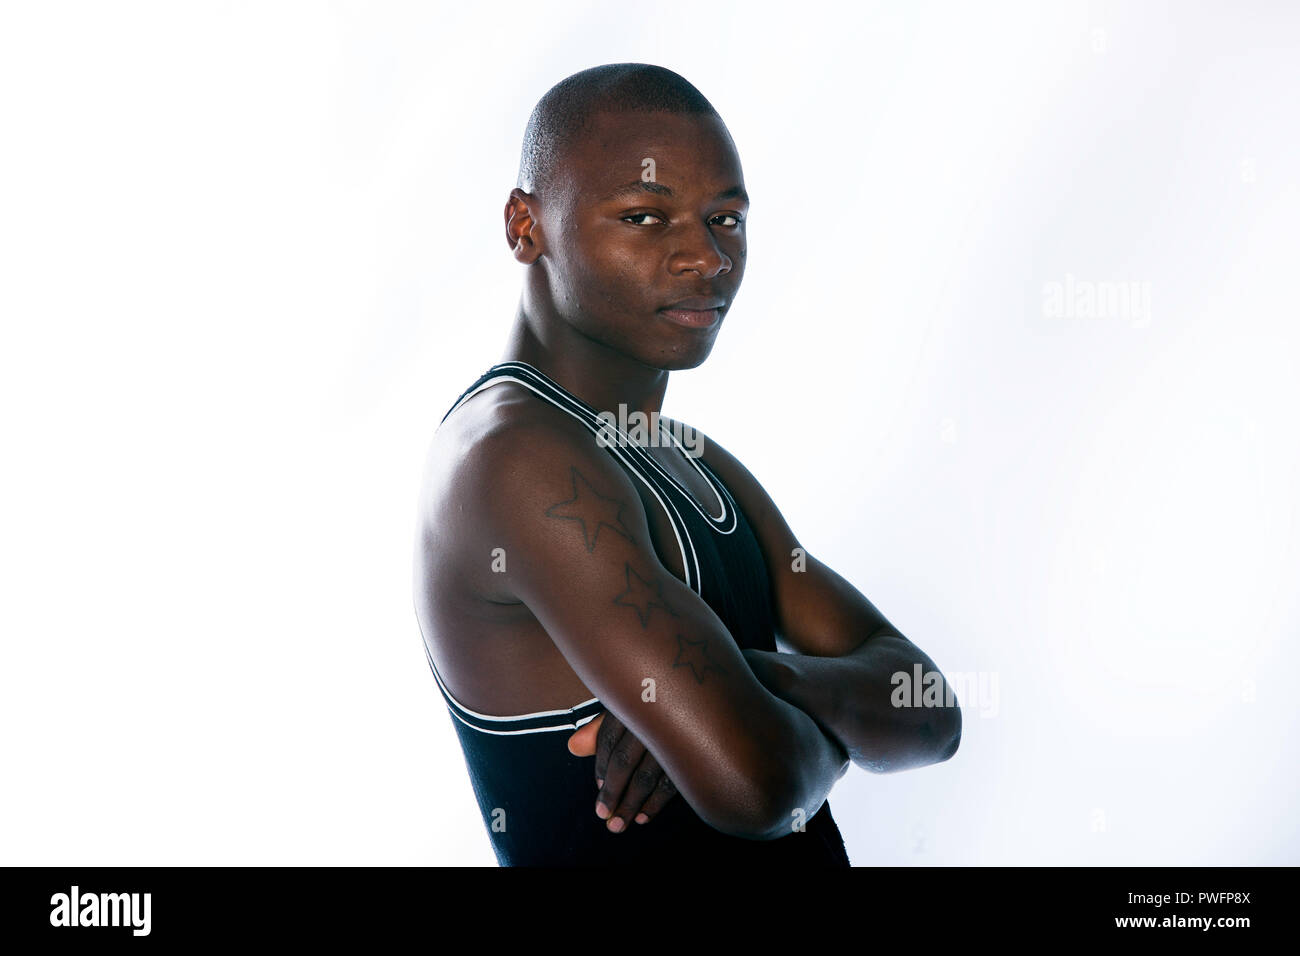 African male with three prison tattoos wearing a muscle shirt looking sideways towards the camera with his arms crossed. Stock Photo